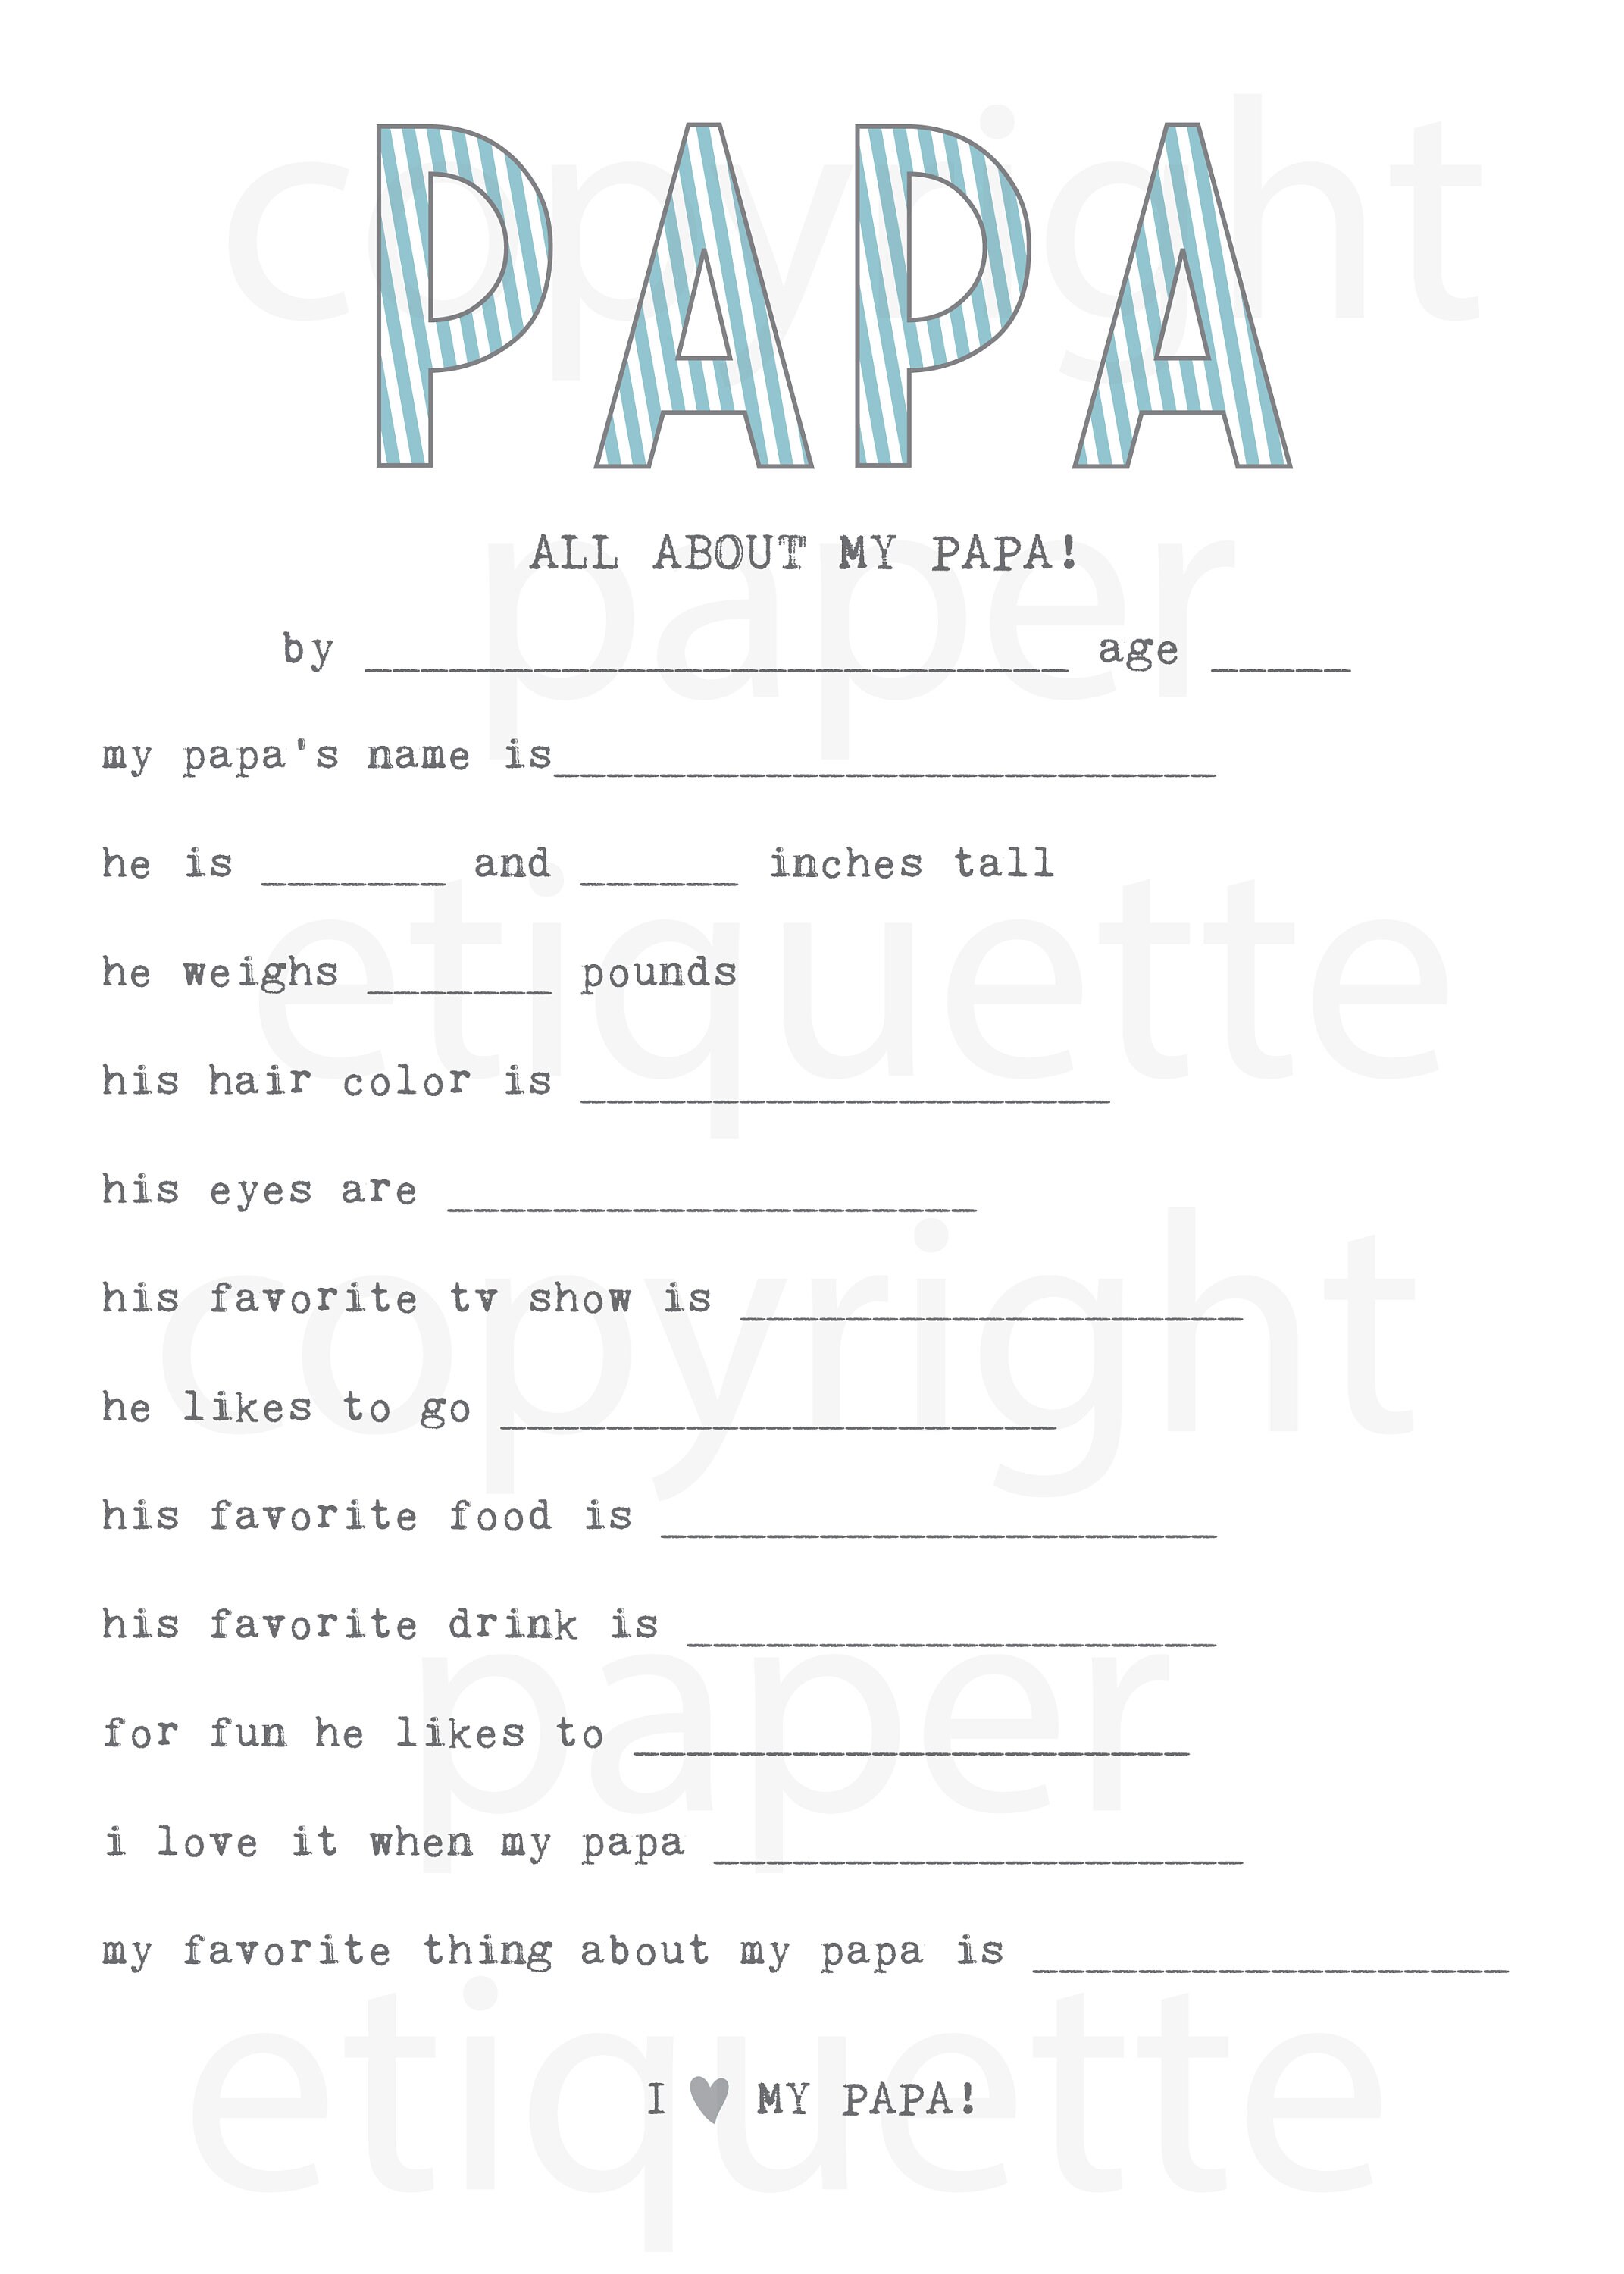 Papa Printable Fathers Day Pinterest Surprise Ideas Diy Things 